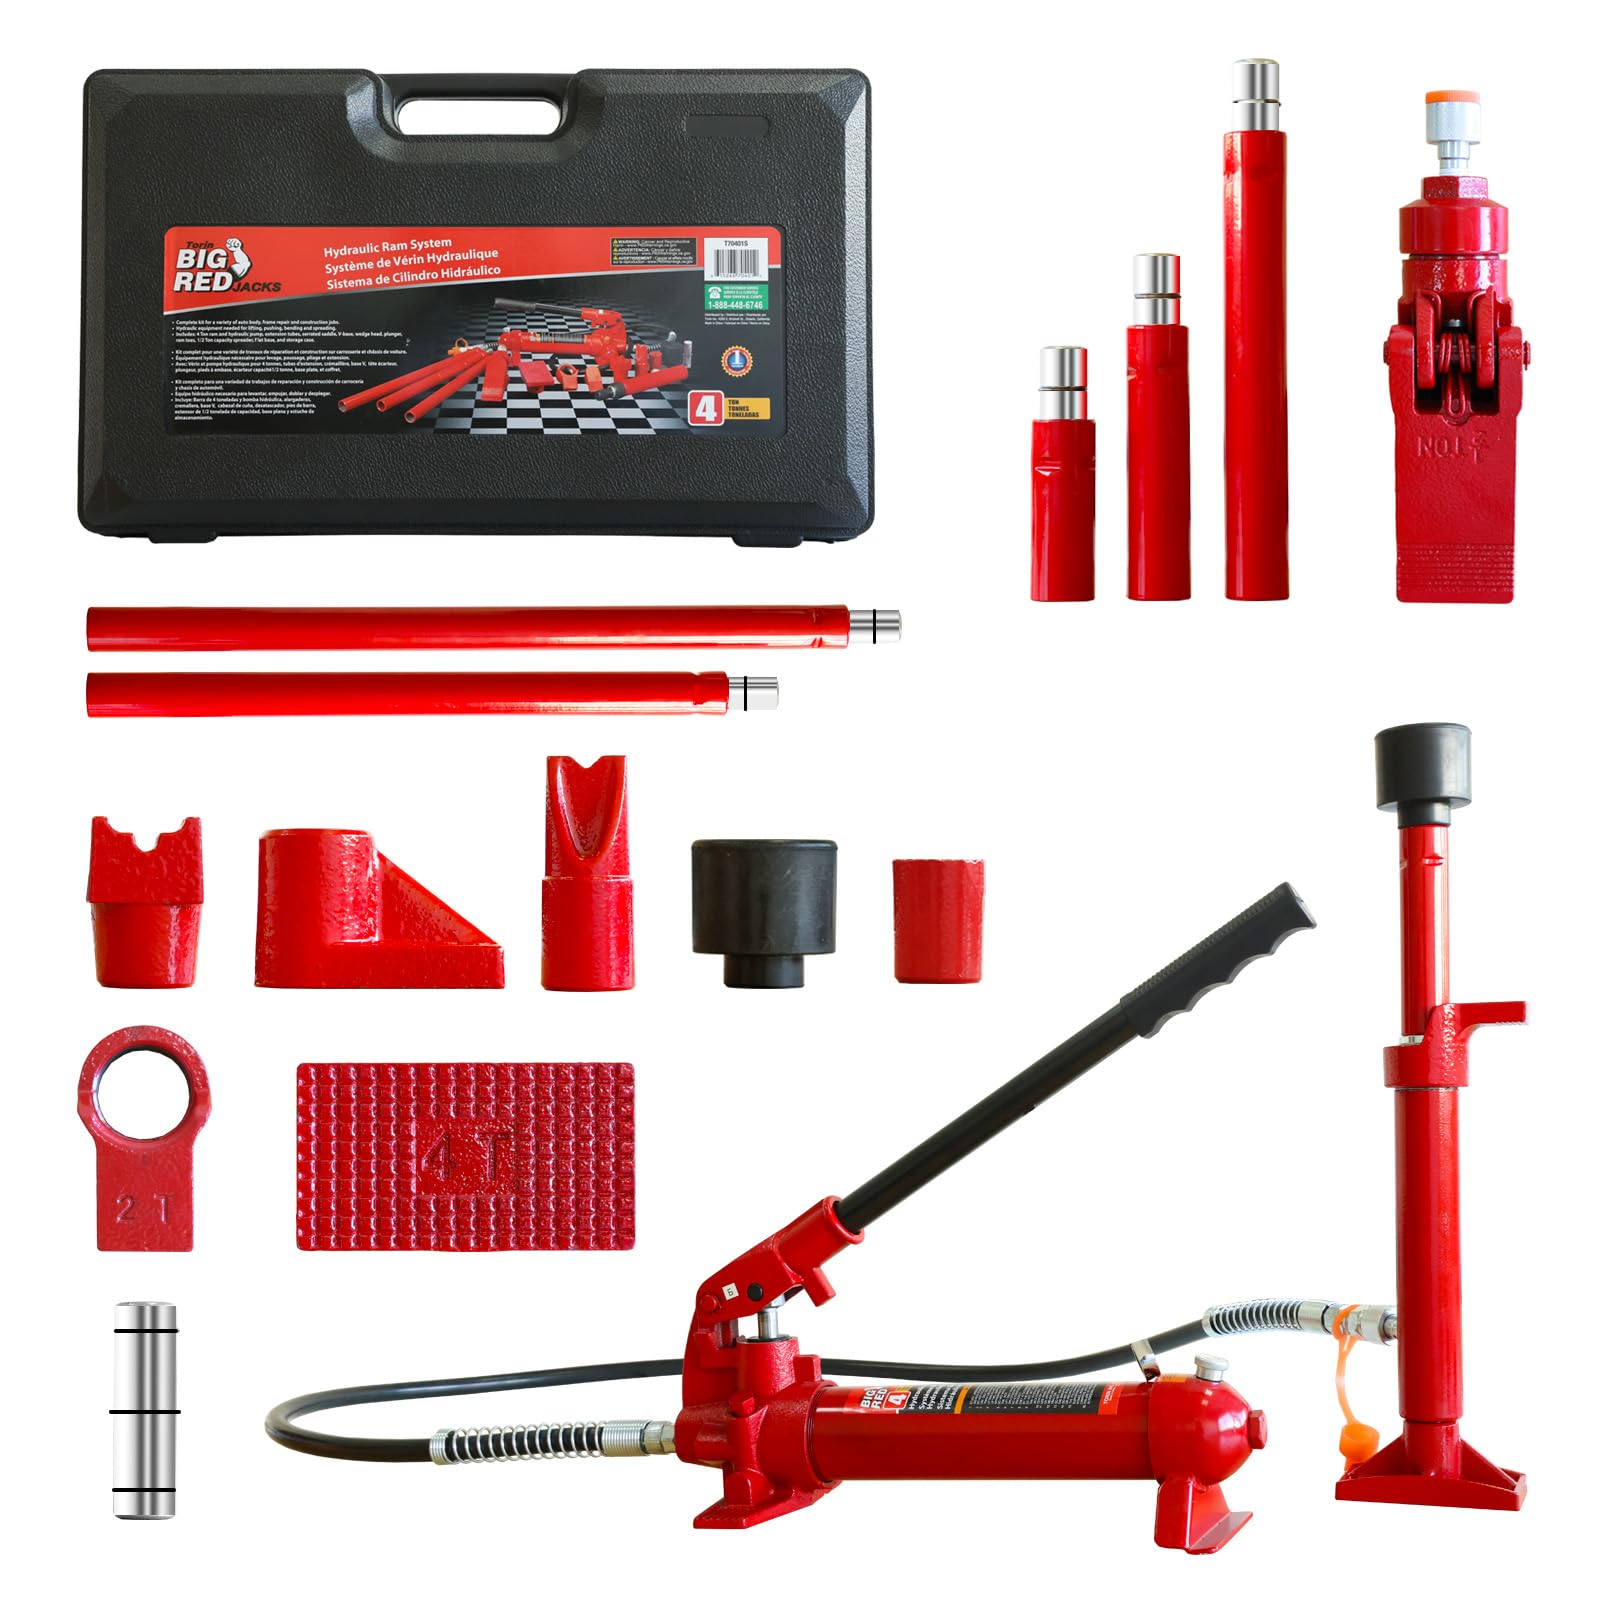 BIg RED 4 Ton Porta Power Kit, 17-Pcs Hydraulic Ram Auto Body Frame Repair Kit With Blow Mold carrying Storage case, 8000 Lbs ca